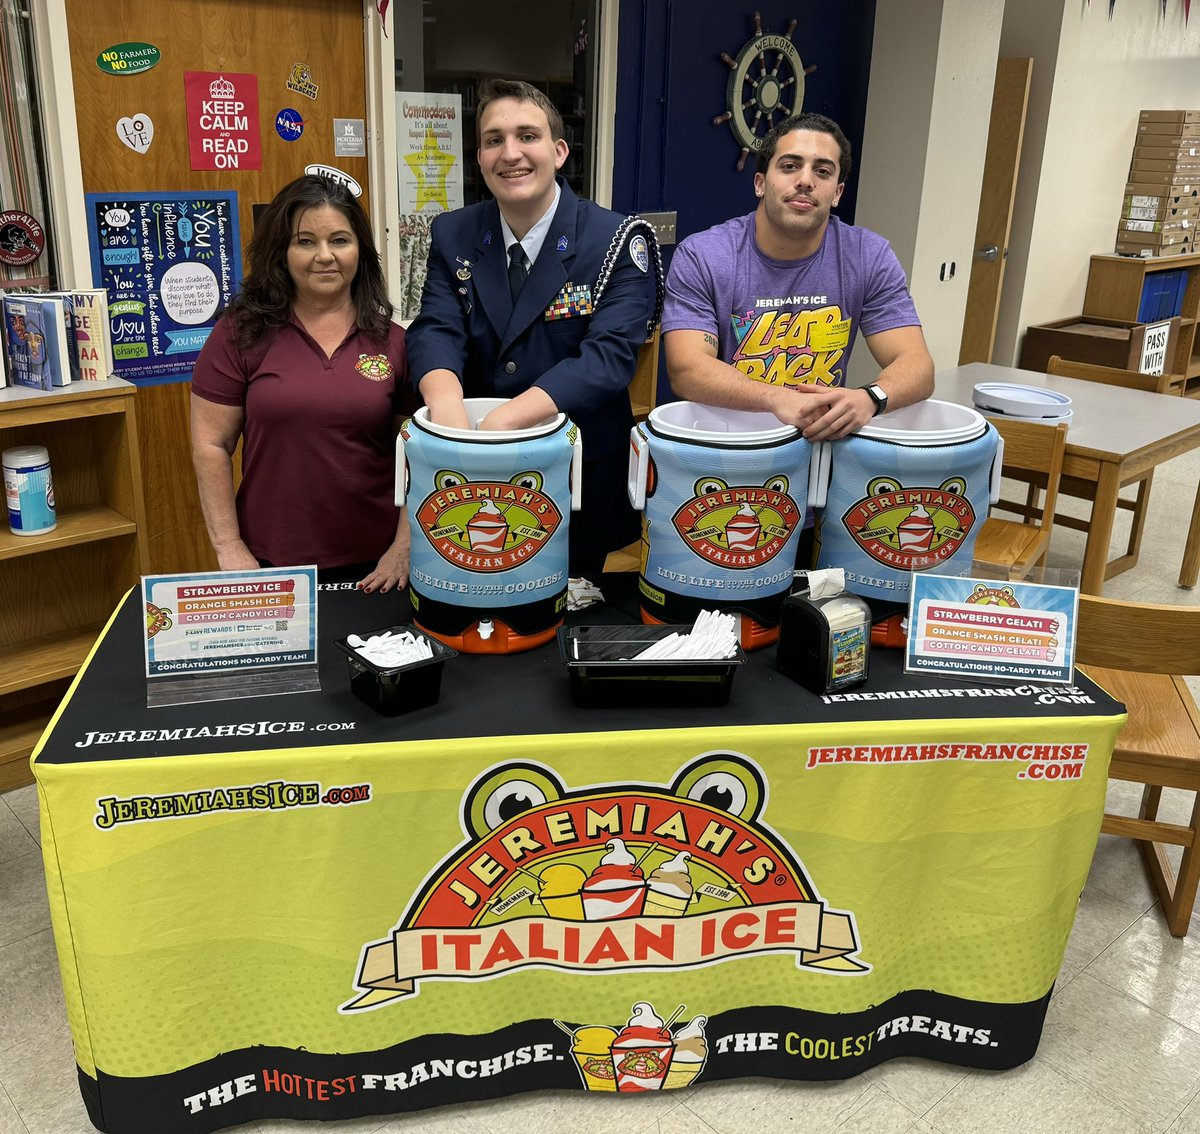 Thank you to Jeremiah‘s Italian Ice for hosting our no tardy party for the 270 students who have not been tardy this year at Eau Gallie High.